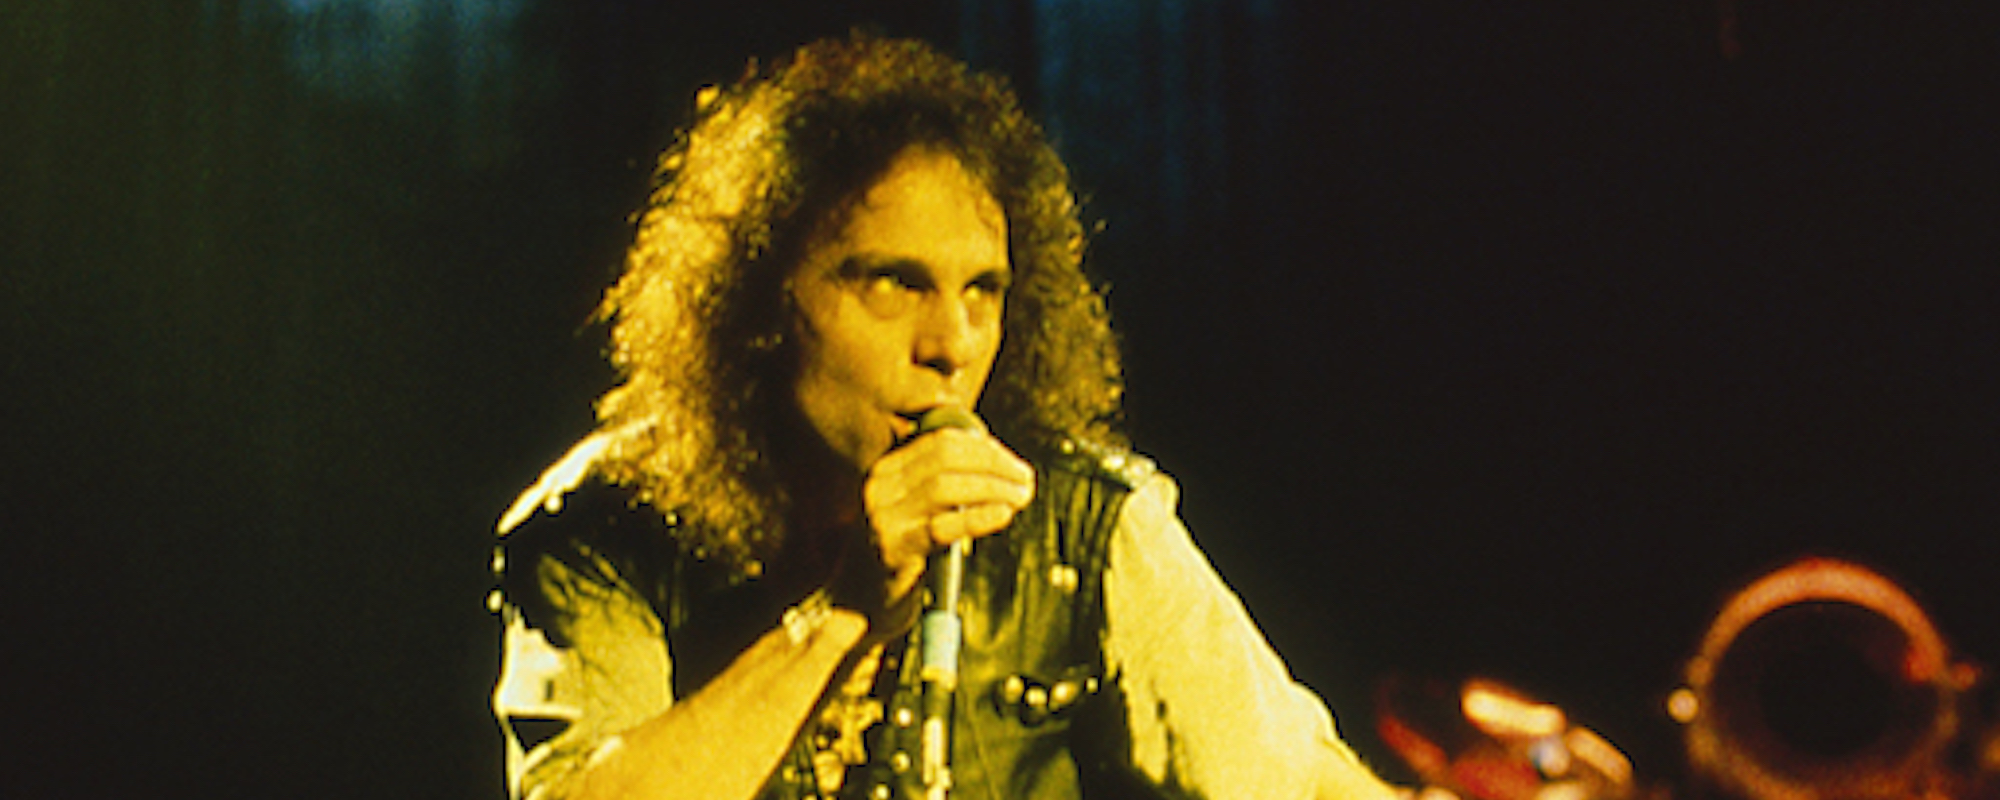 Ronnie James Dio Documentary Set for Release in 2022